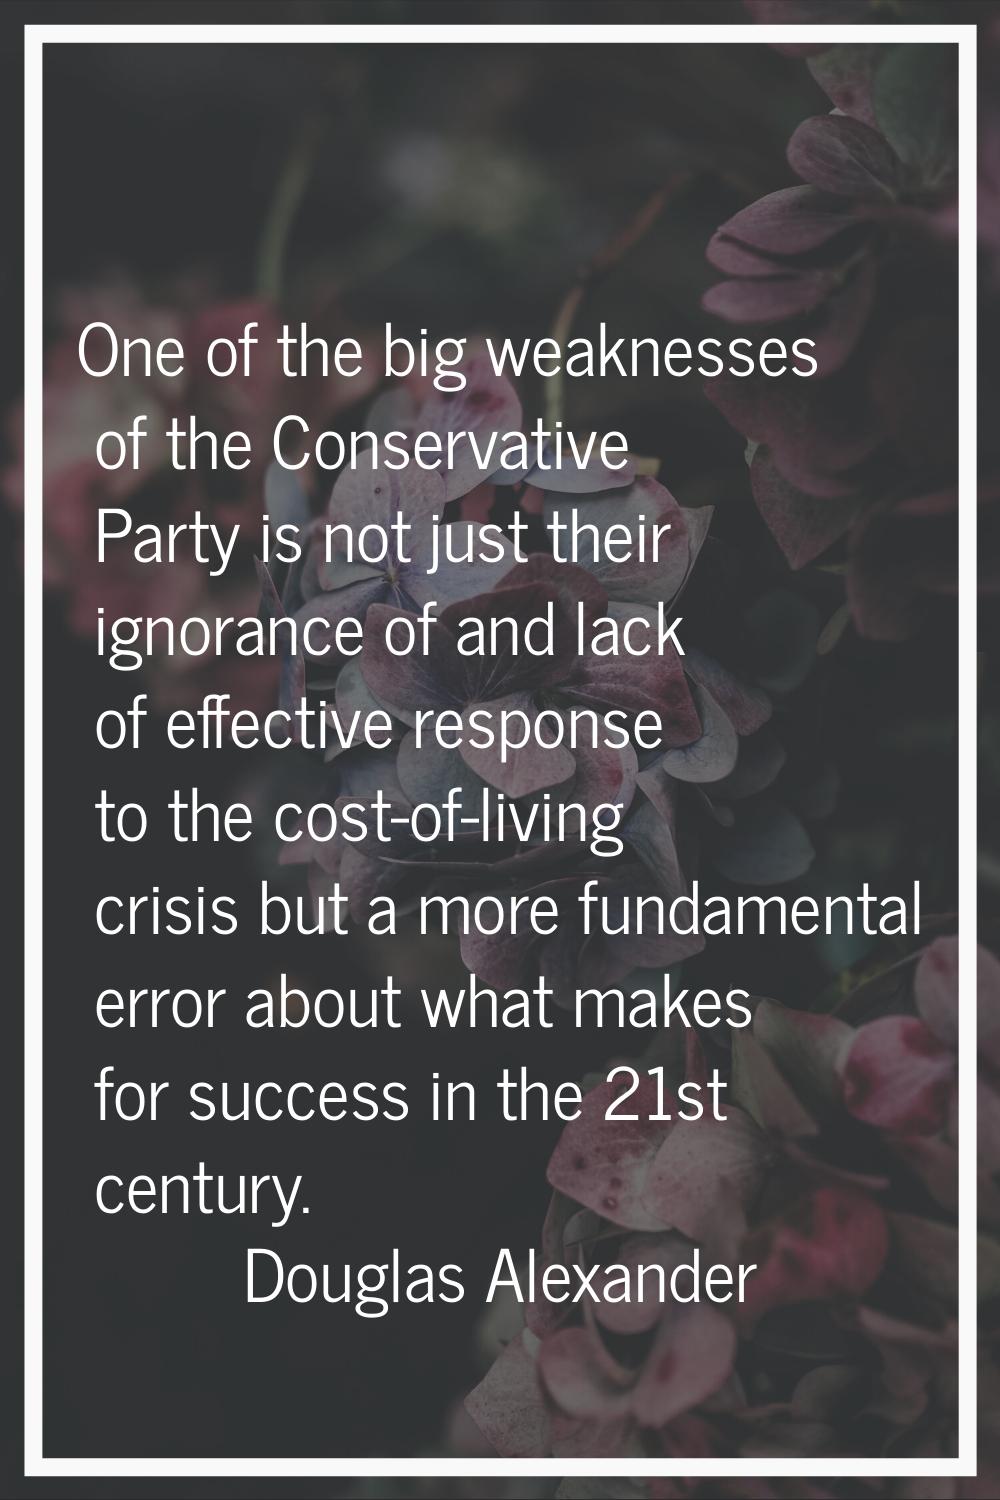 One of the big weaknesses of the Conservative Party is not just their ignorance of and lack of effe